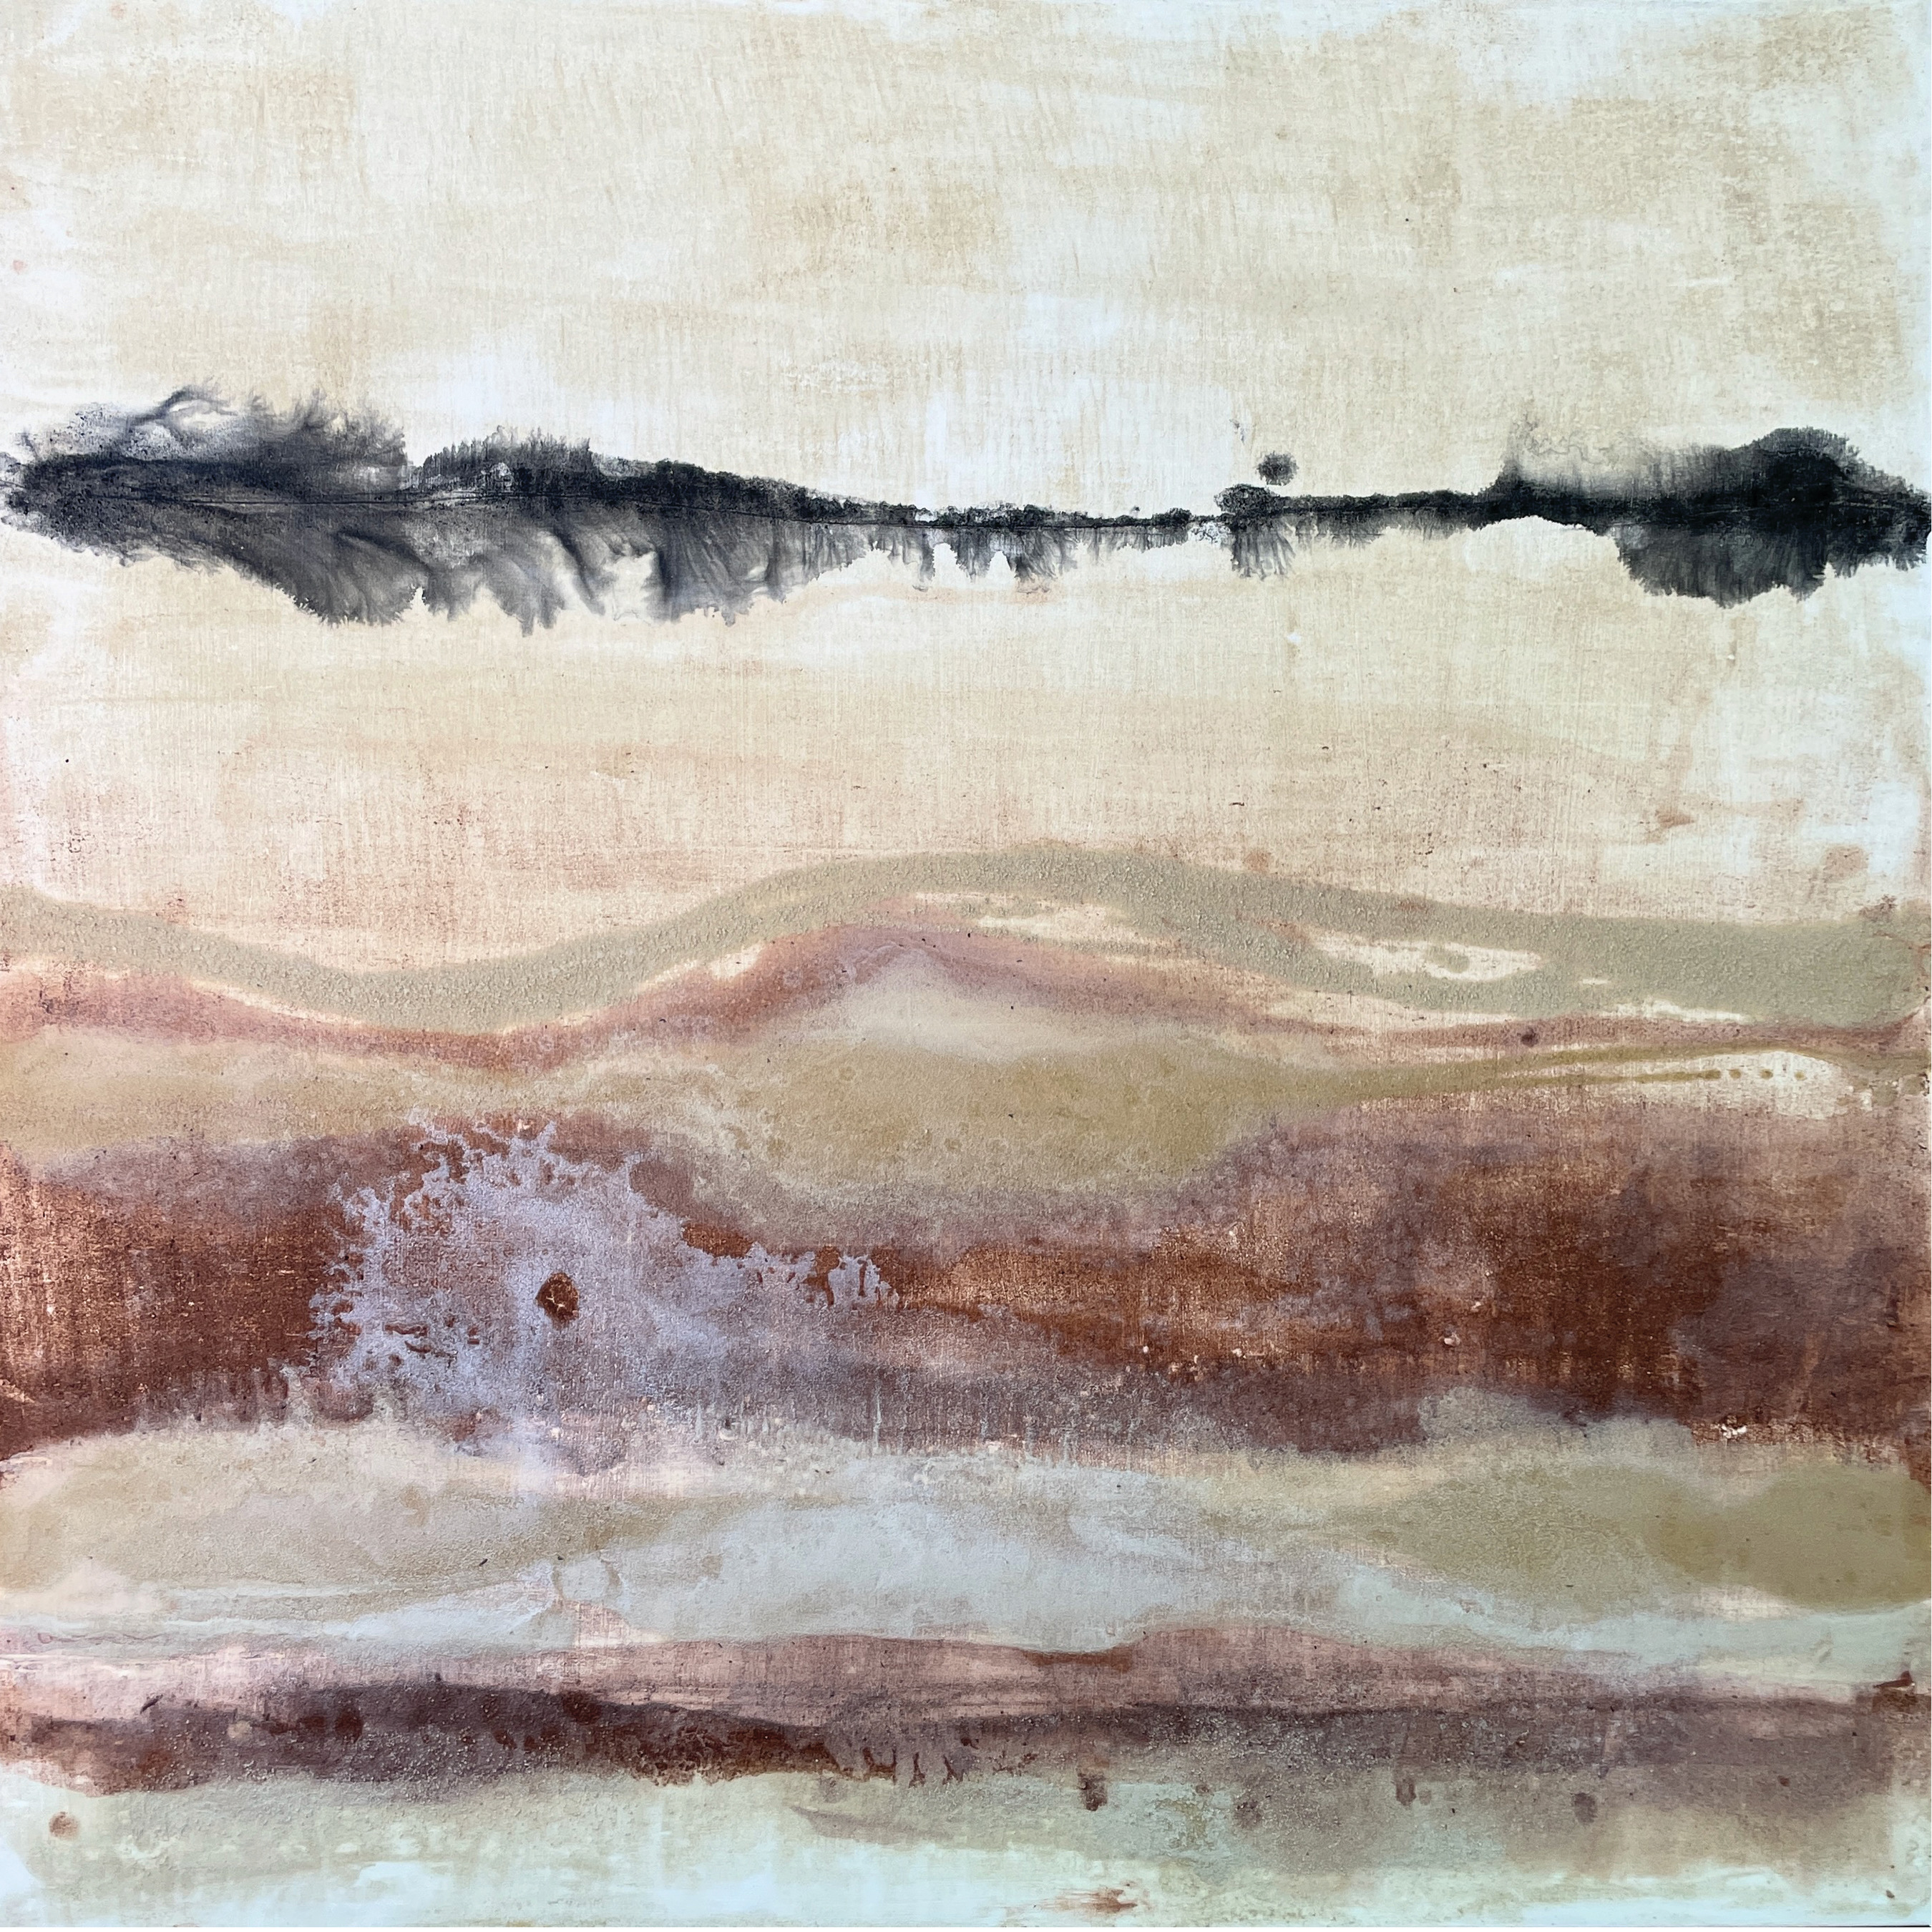 Sediment layers andrea cermanski burnt tumbleweeds rock pigments and polymer on canvas 36inchesx36inches.printsize loxvai